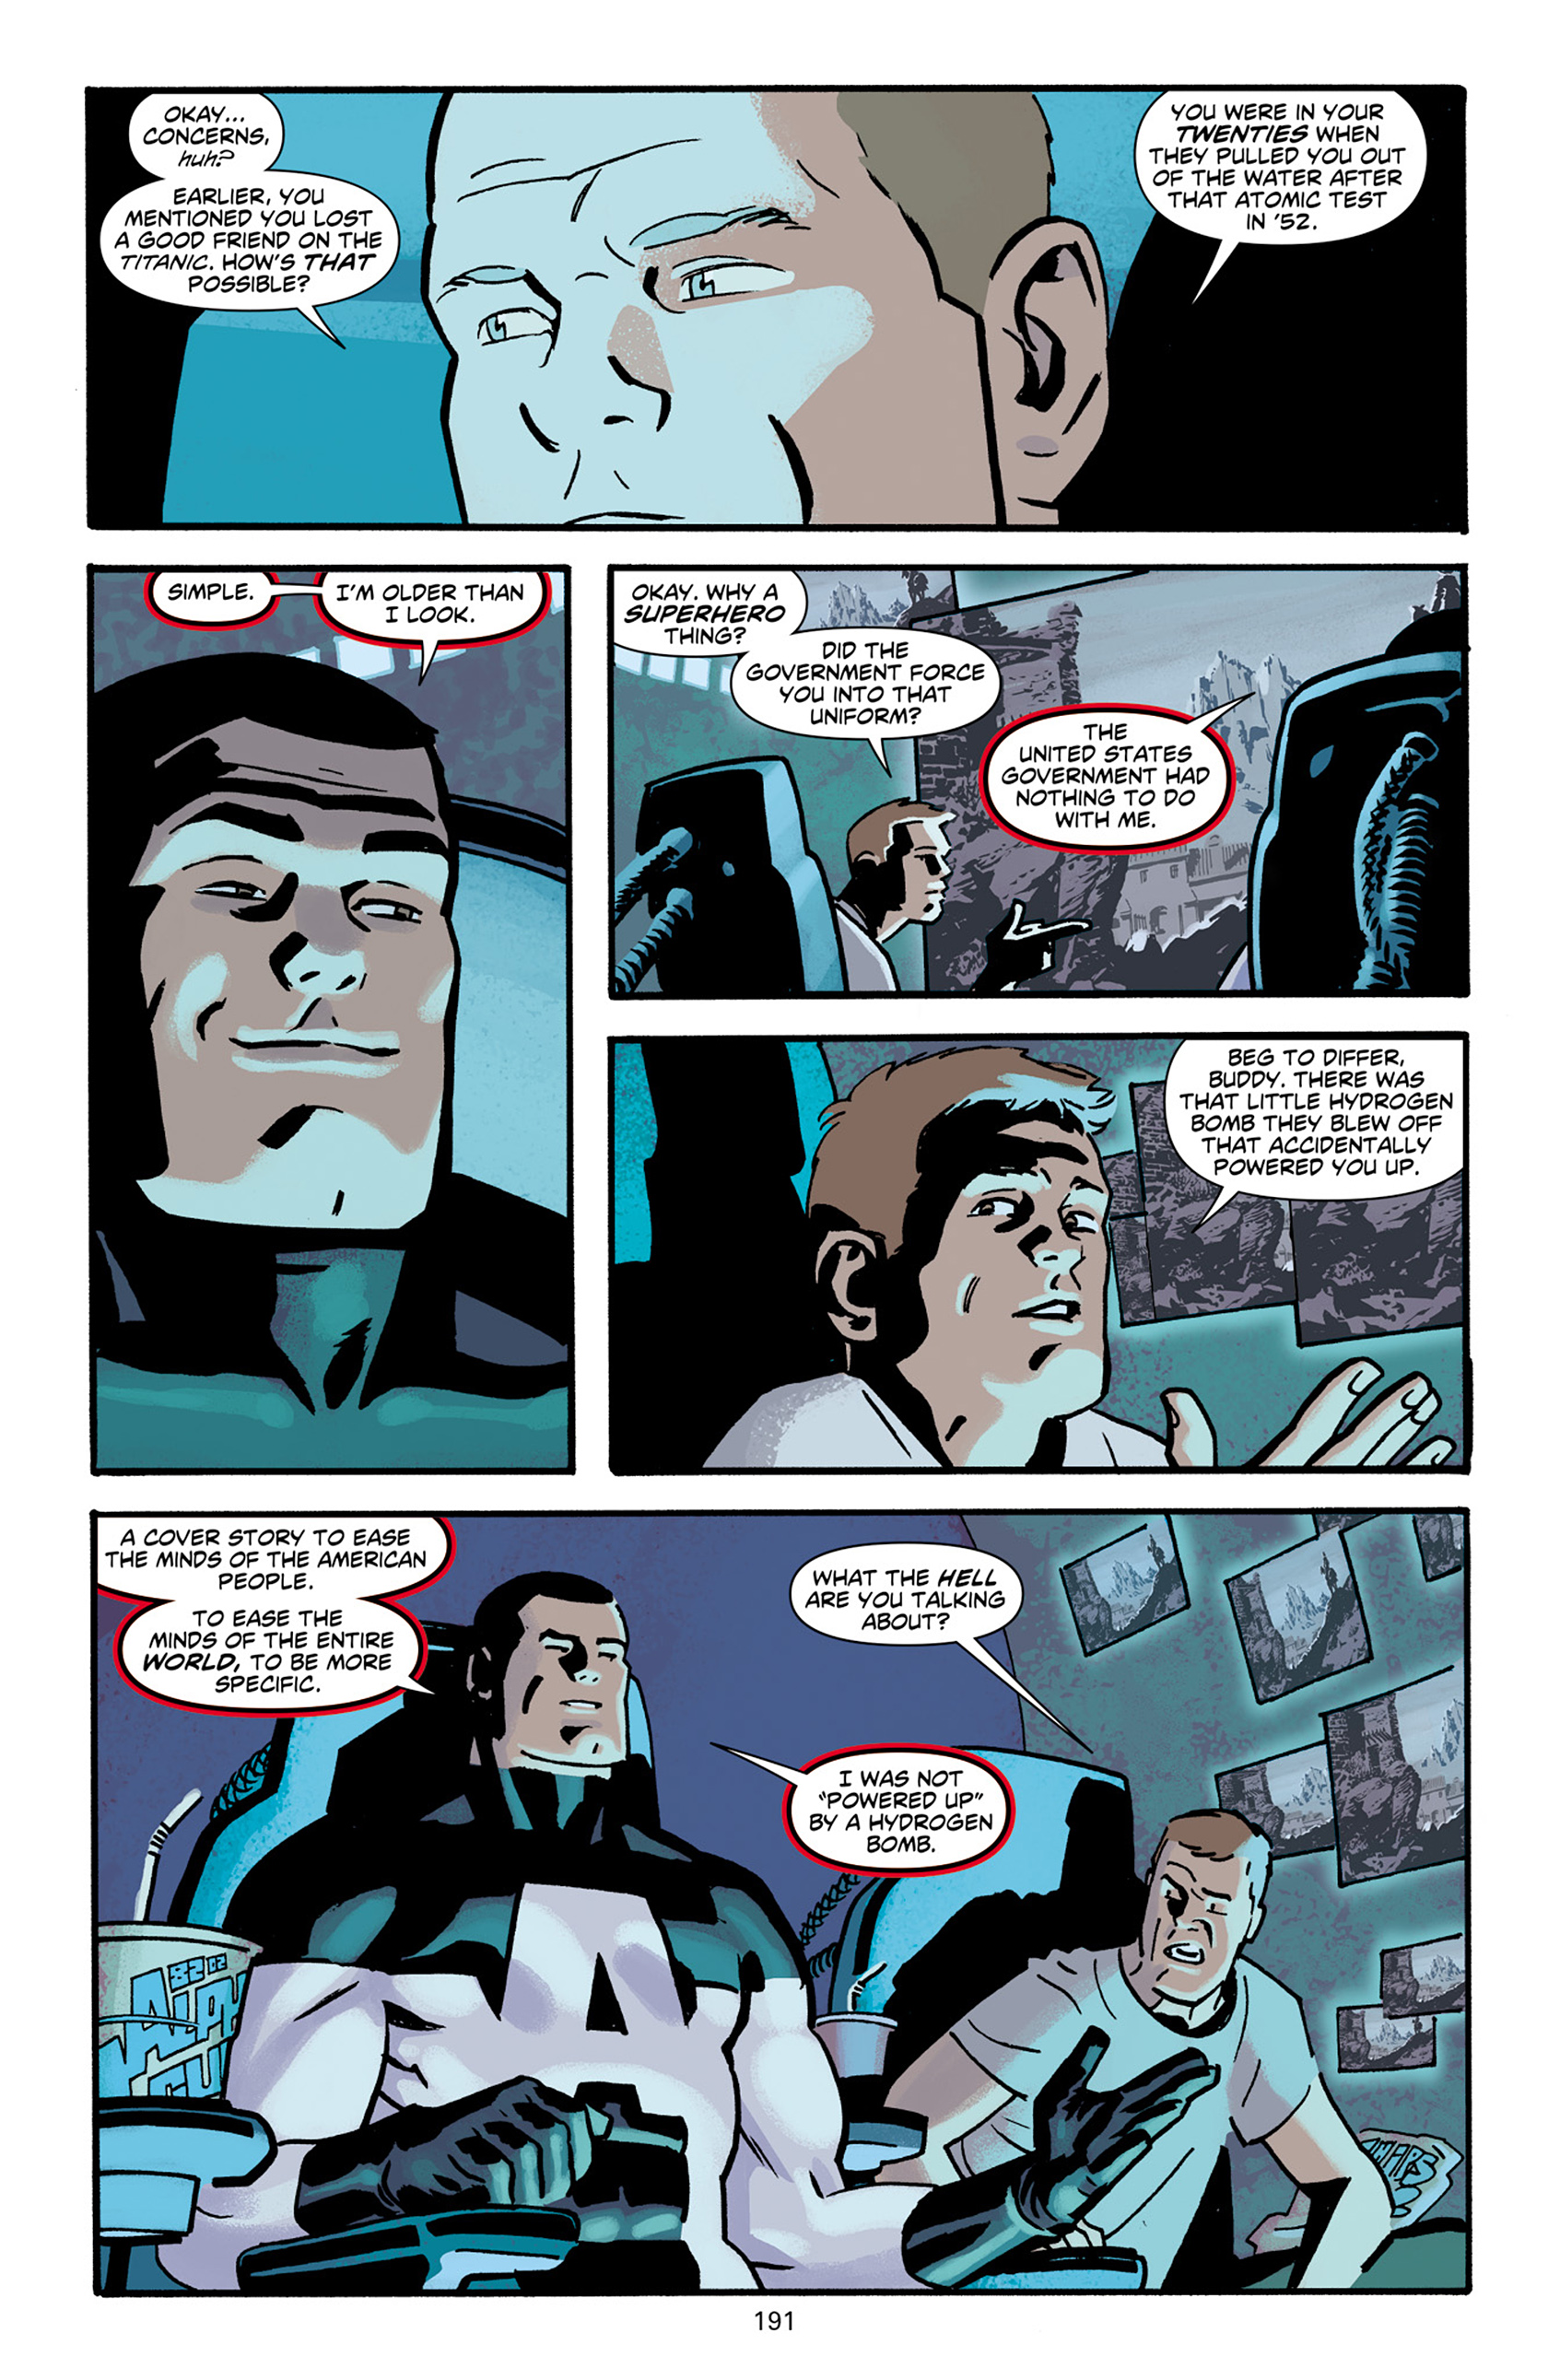 Read online The Mighty comic -  Issue # TPB - 183